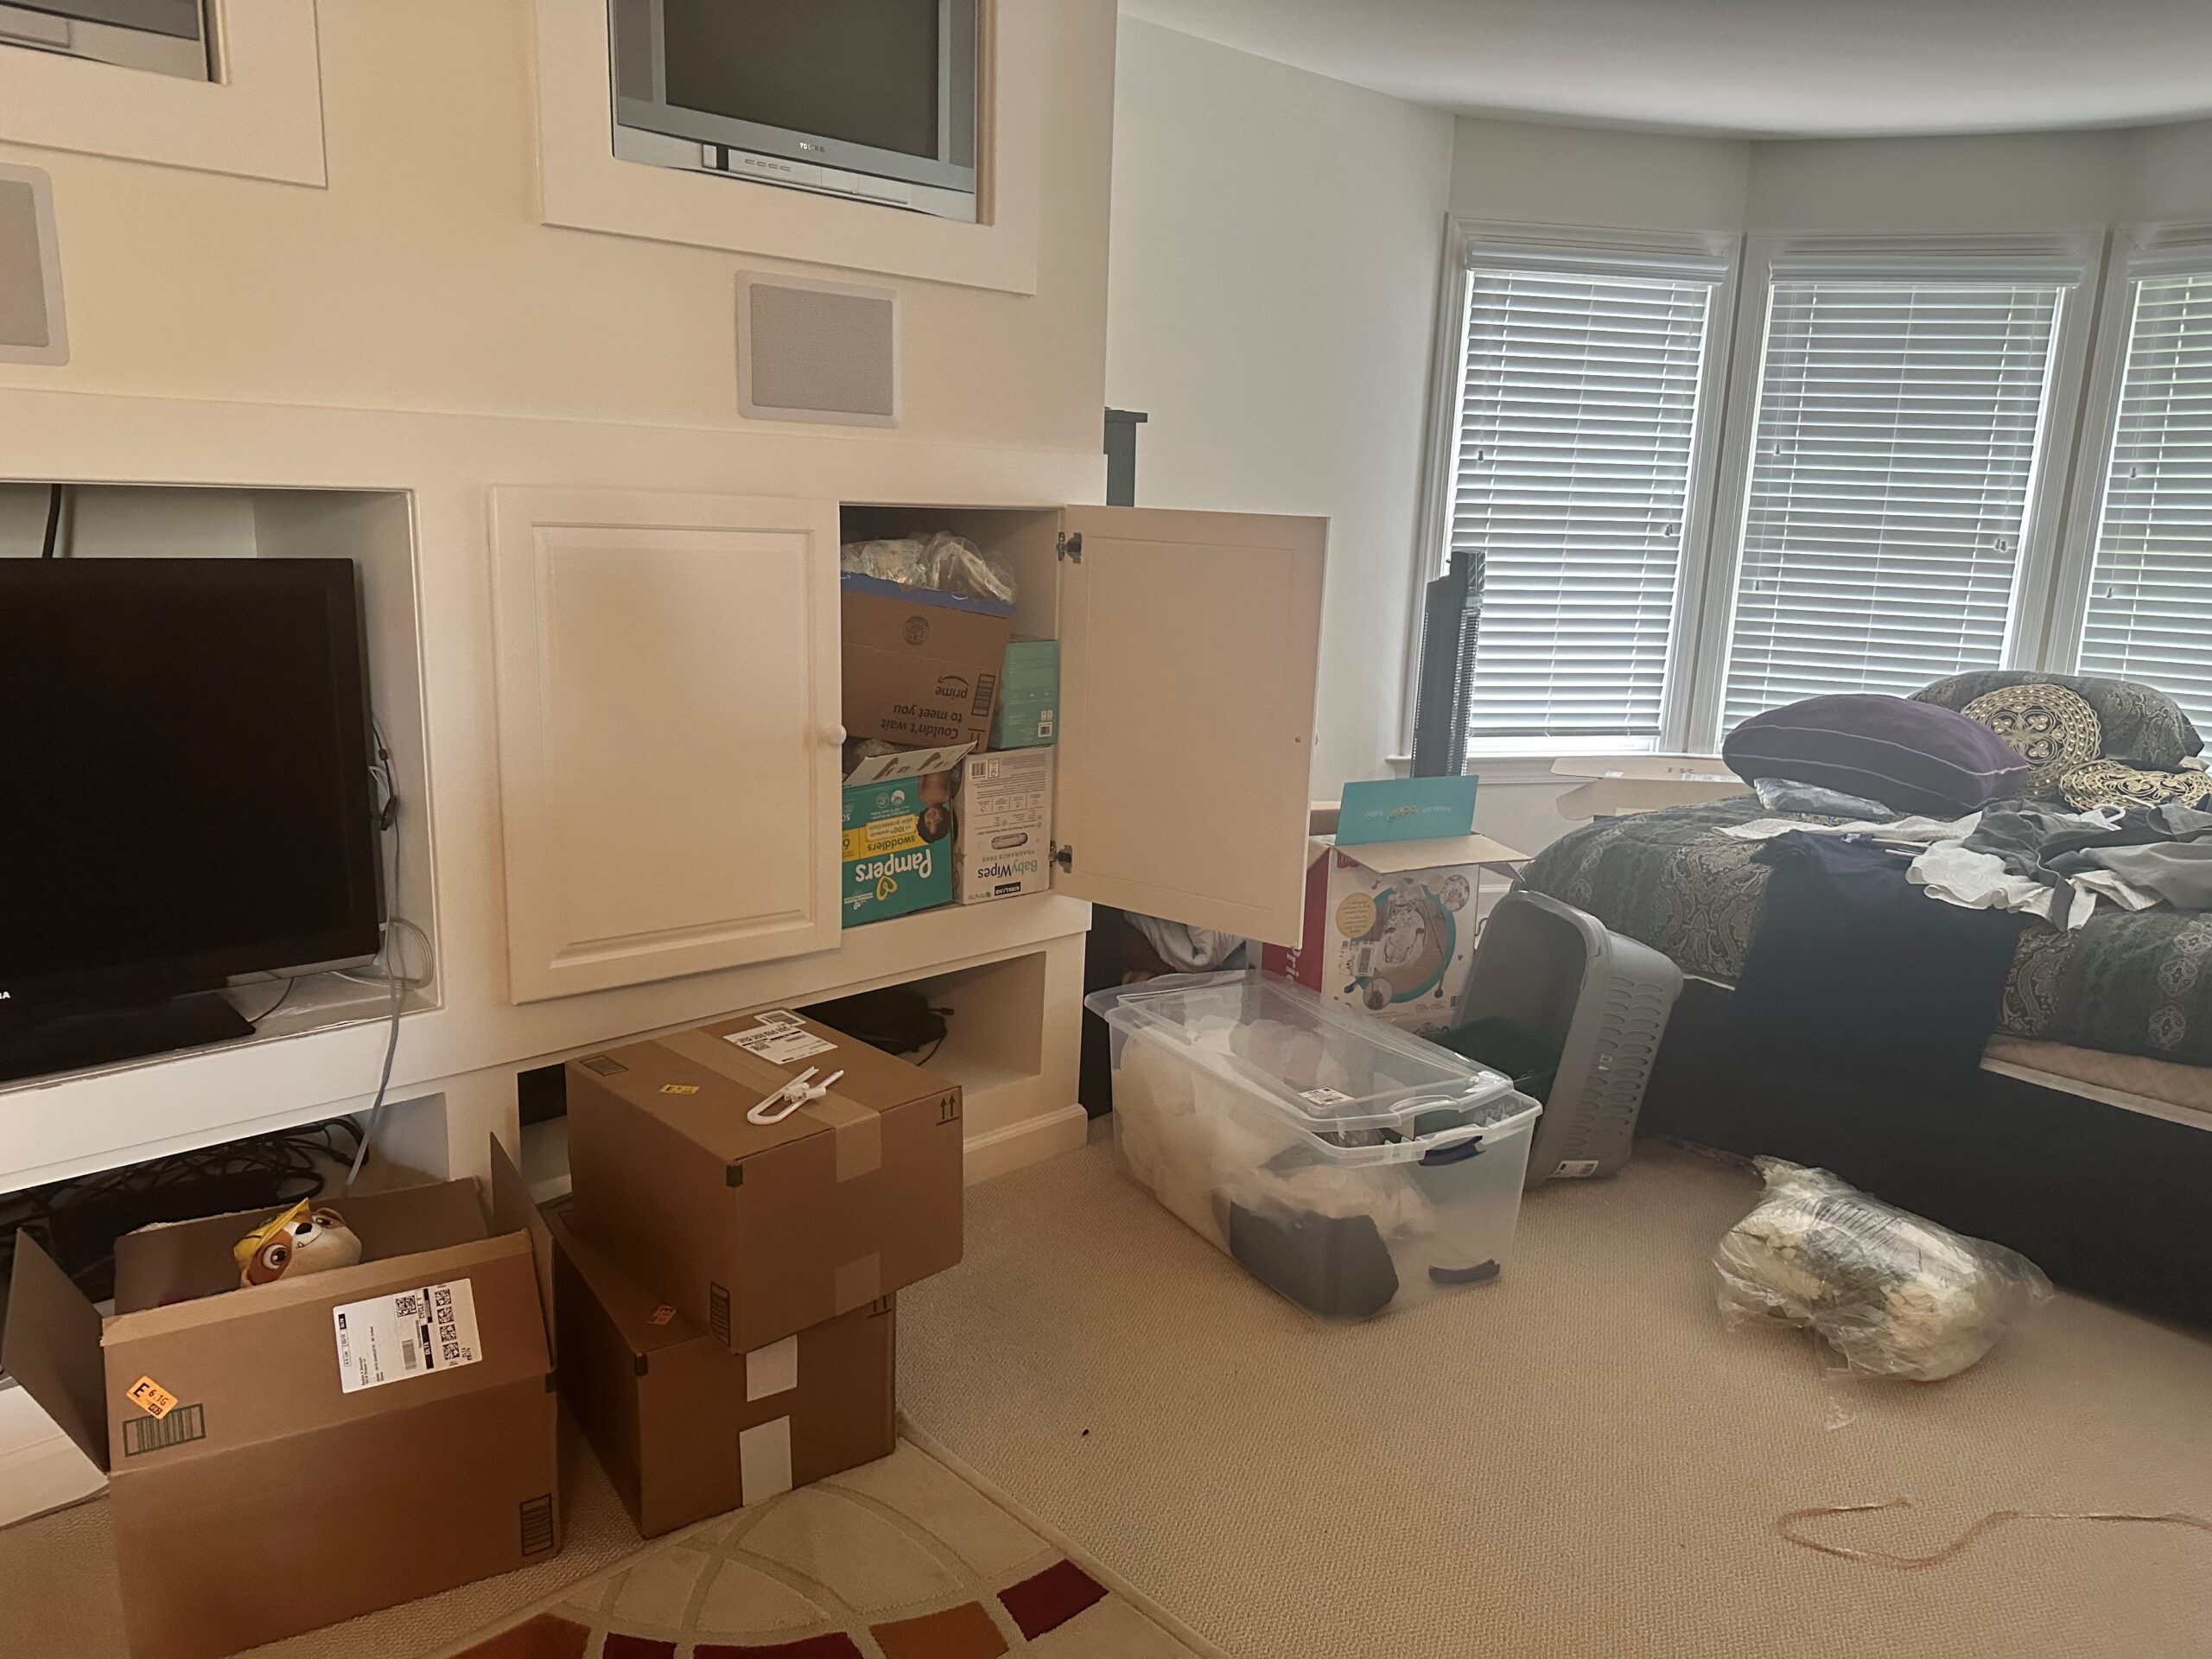 hoarded room with boxes